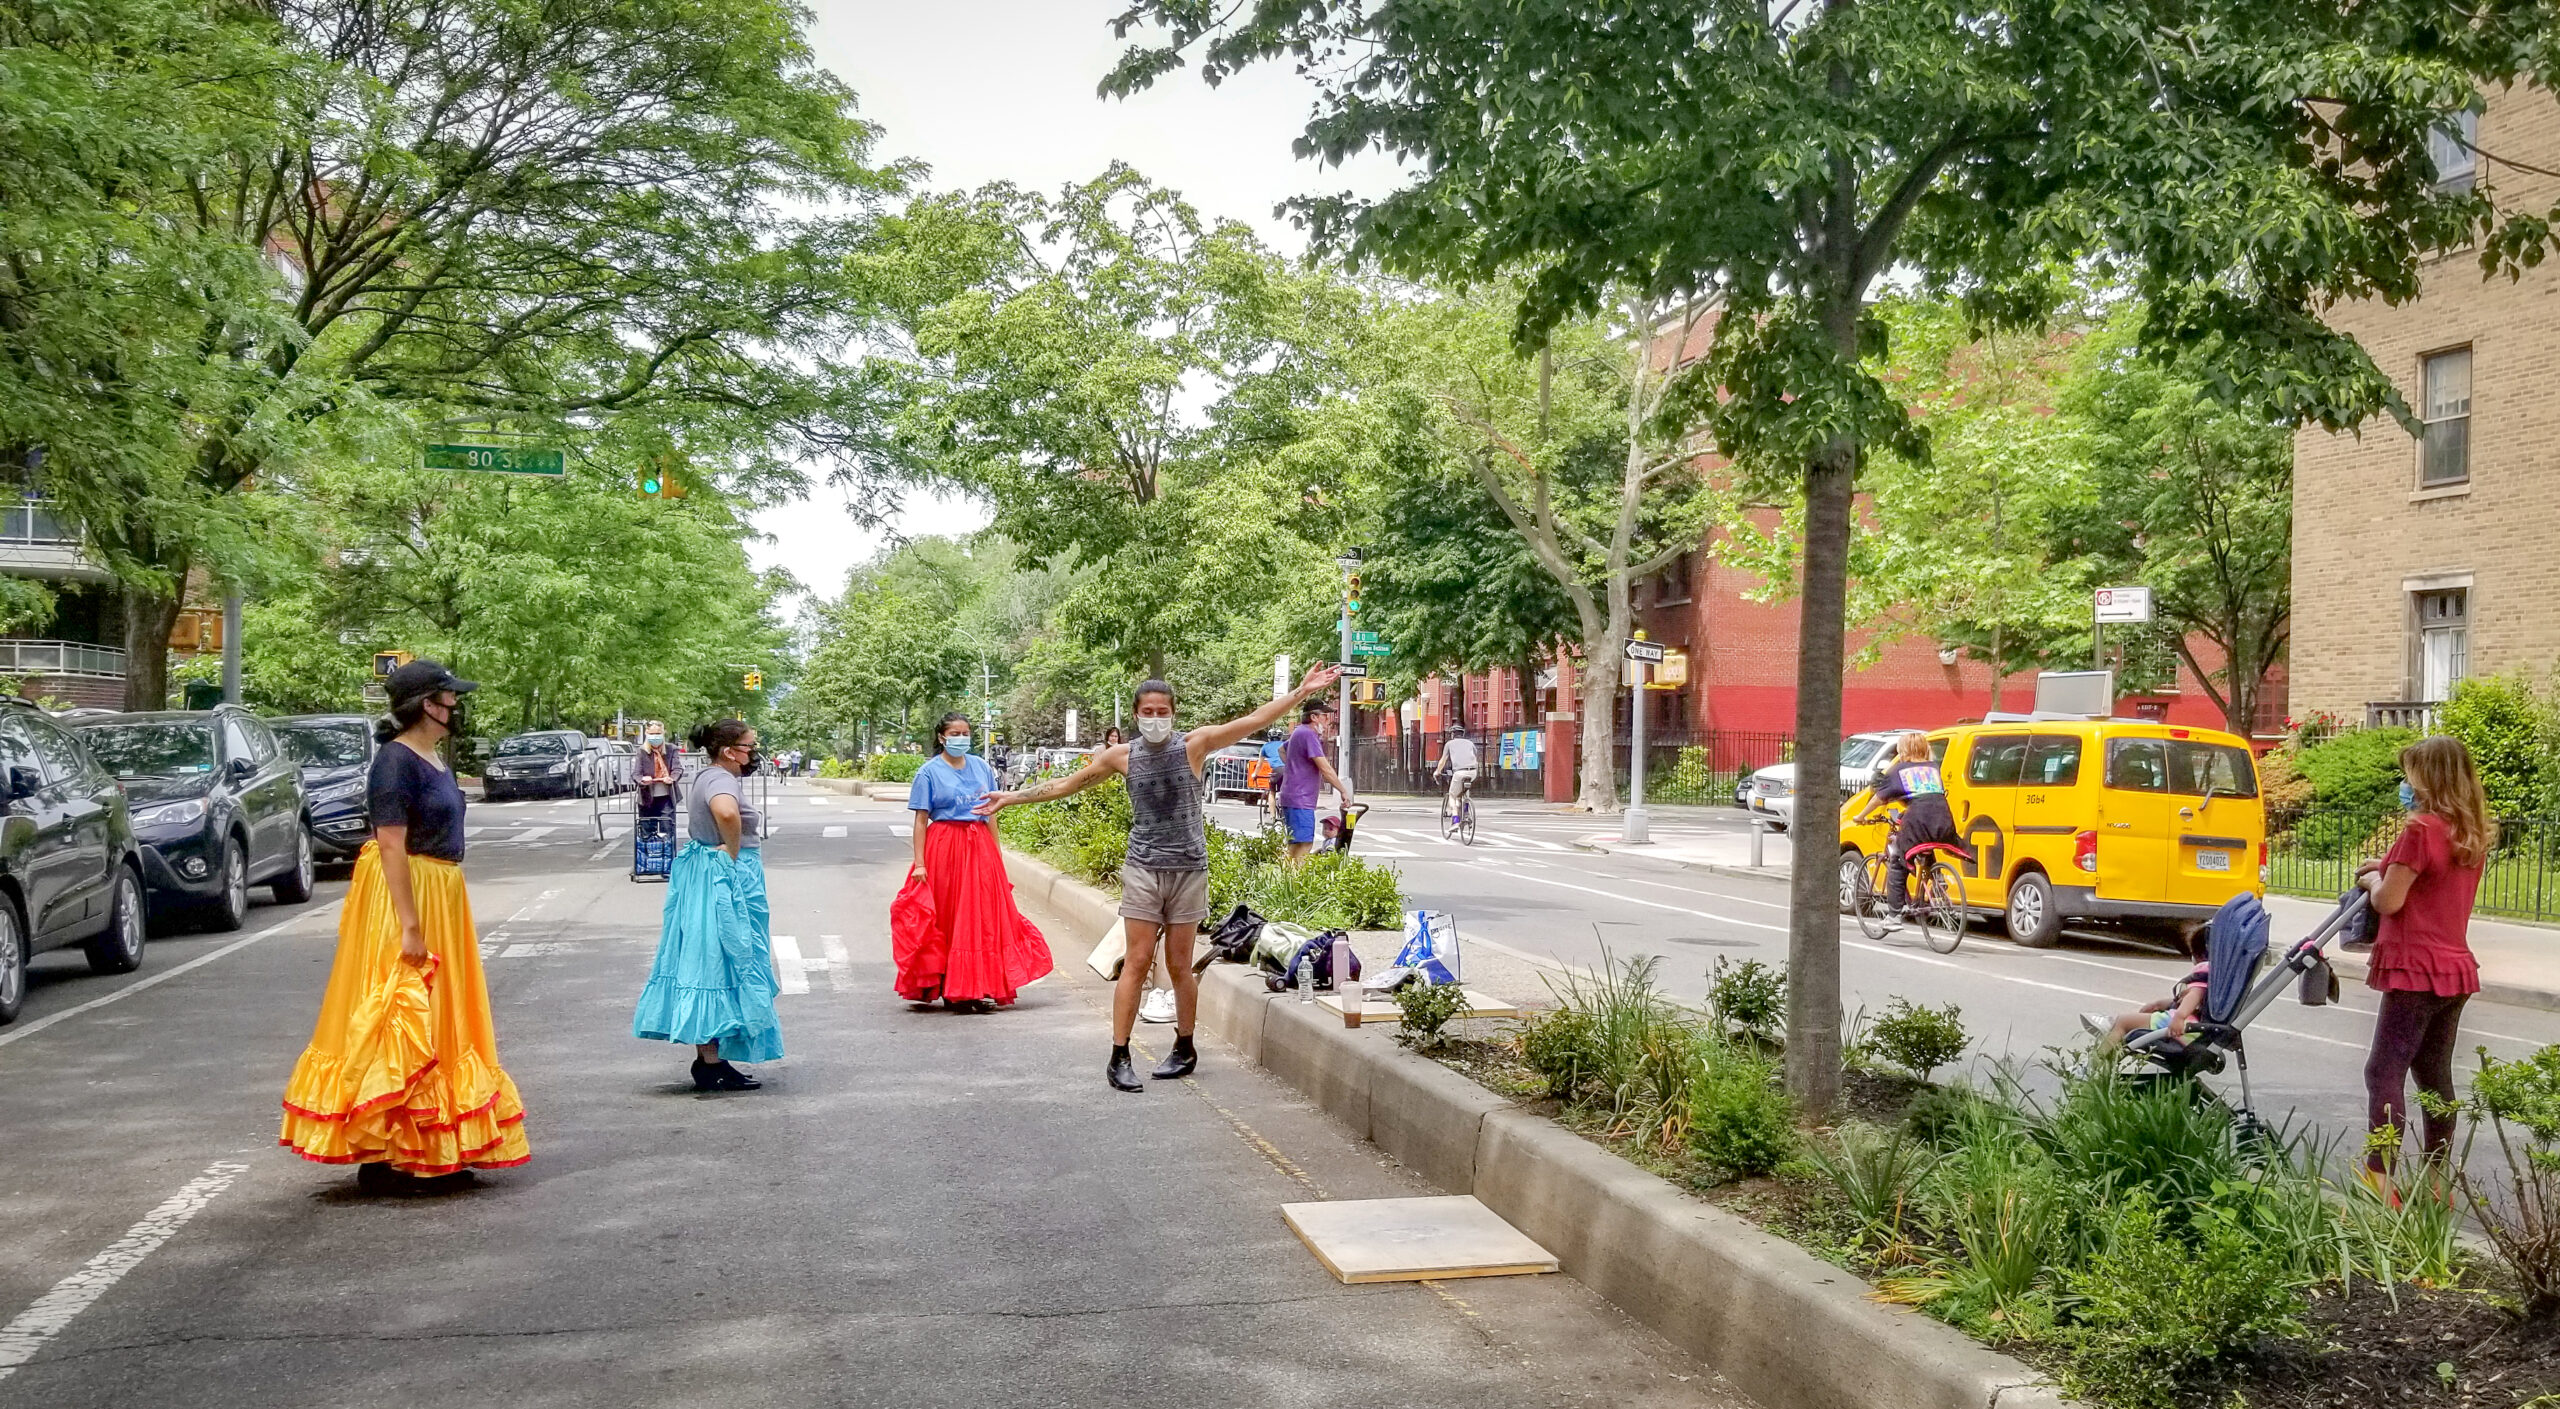 During a rehearsal on 34th Avenue, Erick demonstrates a dance move as three dancers watch him. On the other side of the median, a woman has stopped to observe the rehearsal.